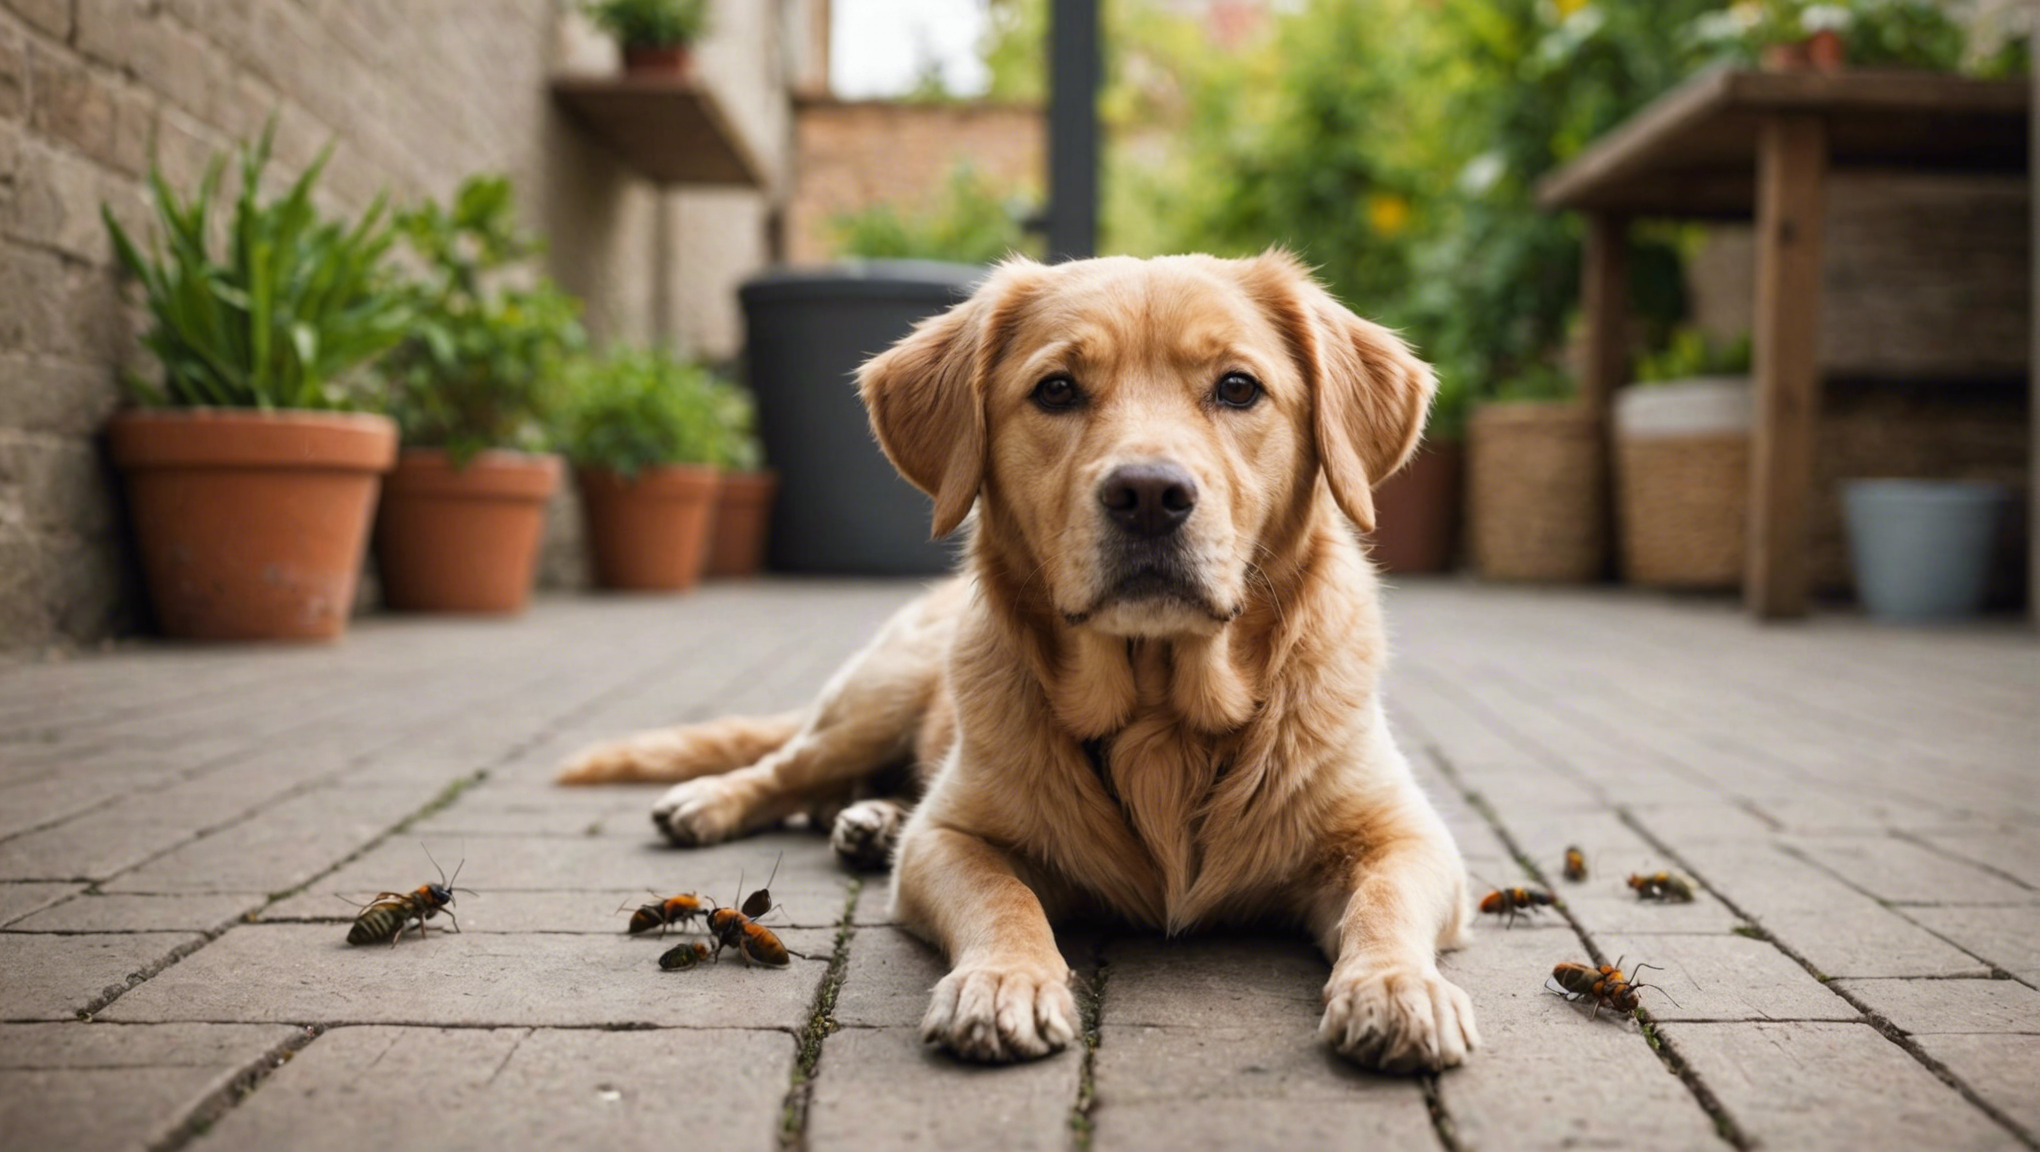 learn how to protect your pets from pests with this ultimate guide to pet-friendly pest control. find out effective ways to keep your pets safe and free from pests.